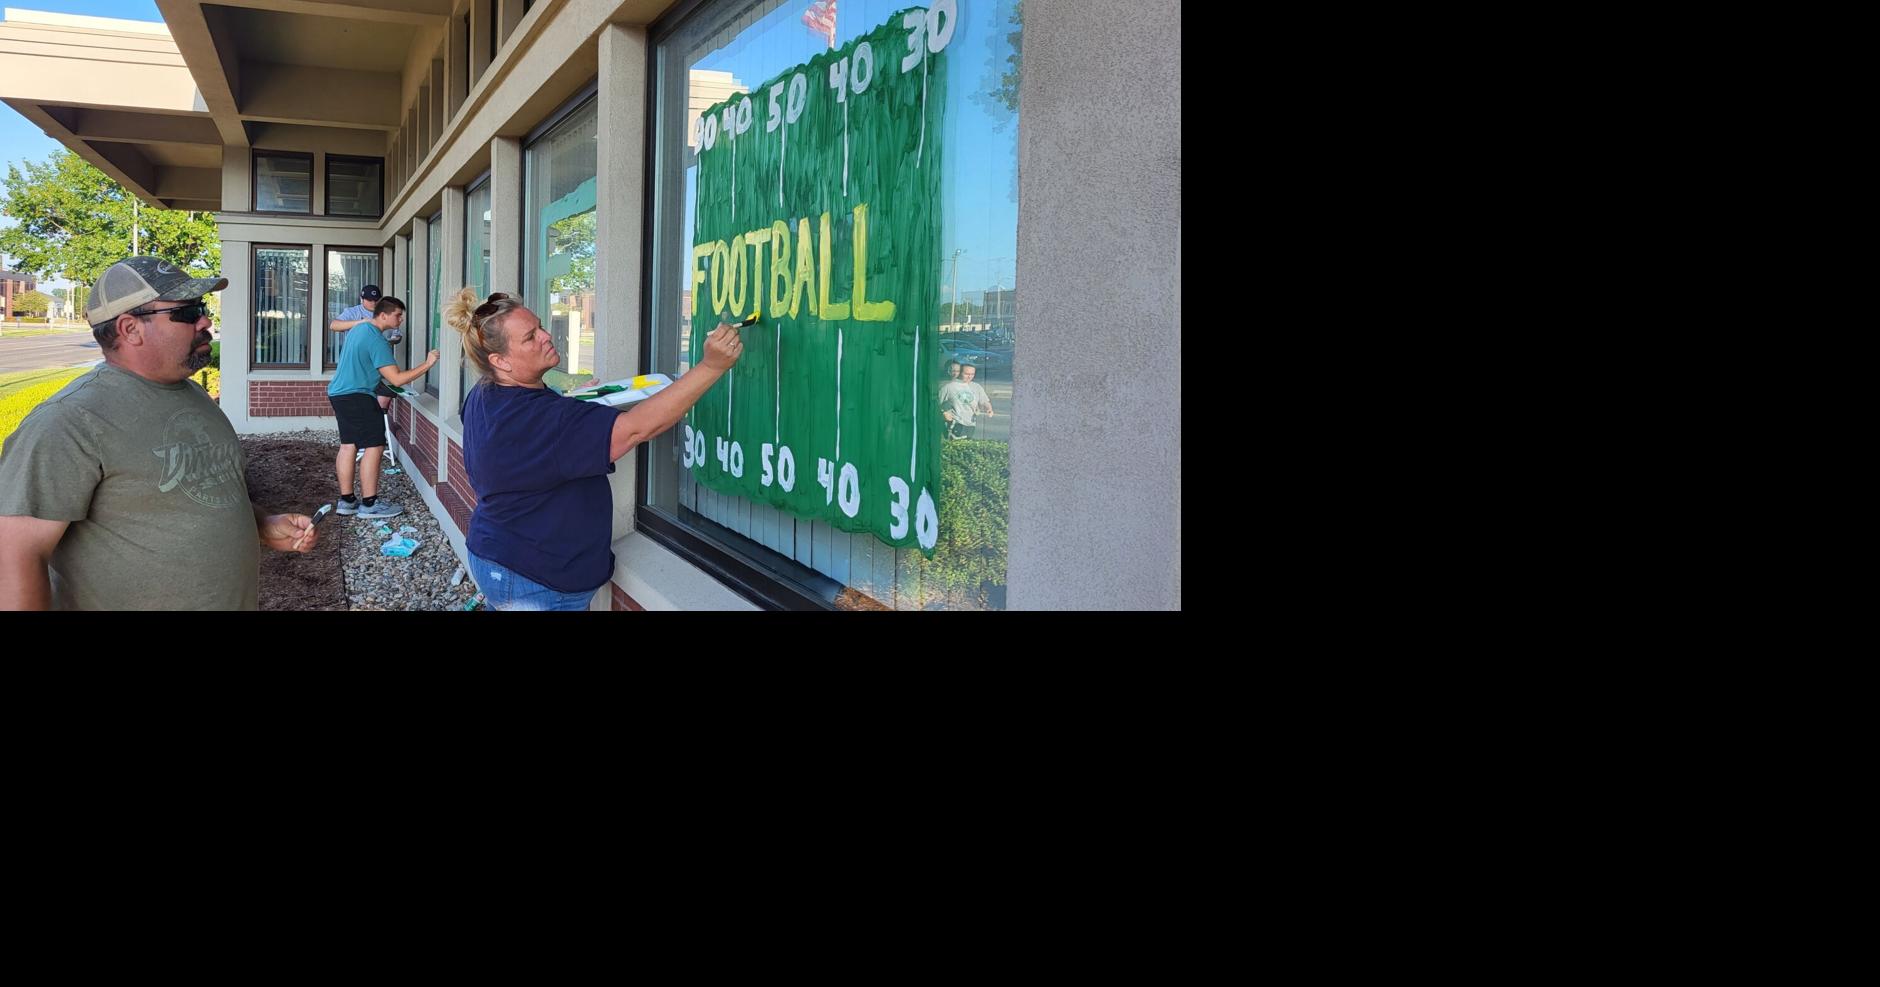 MHS Huddle painting windows for first Mattoon home football game of the season